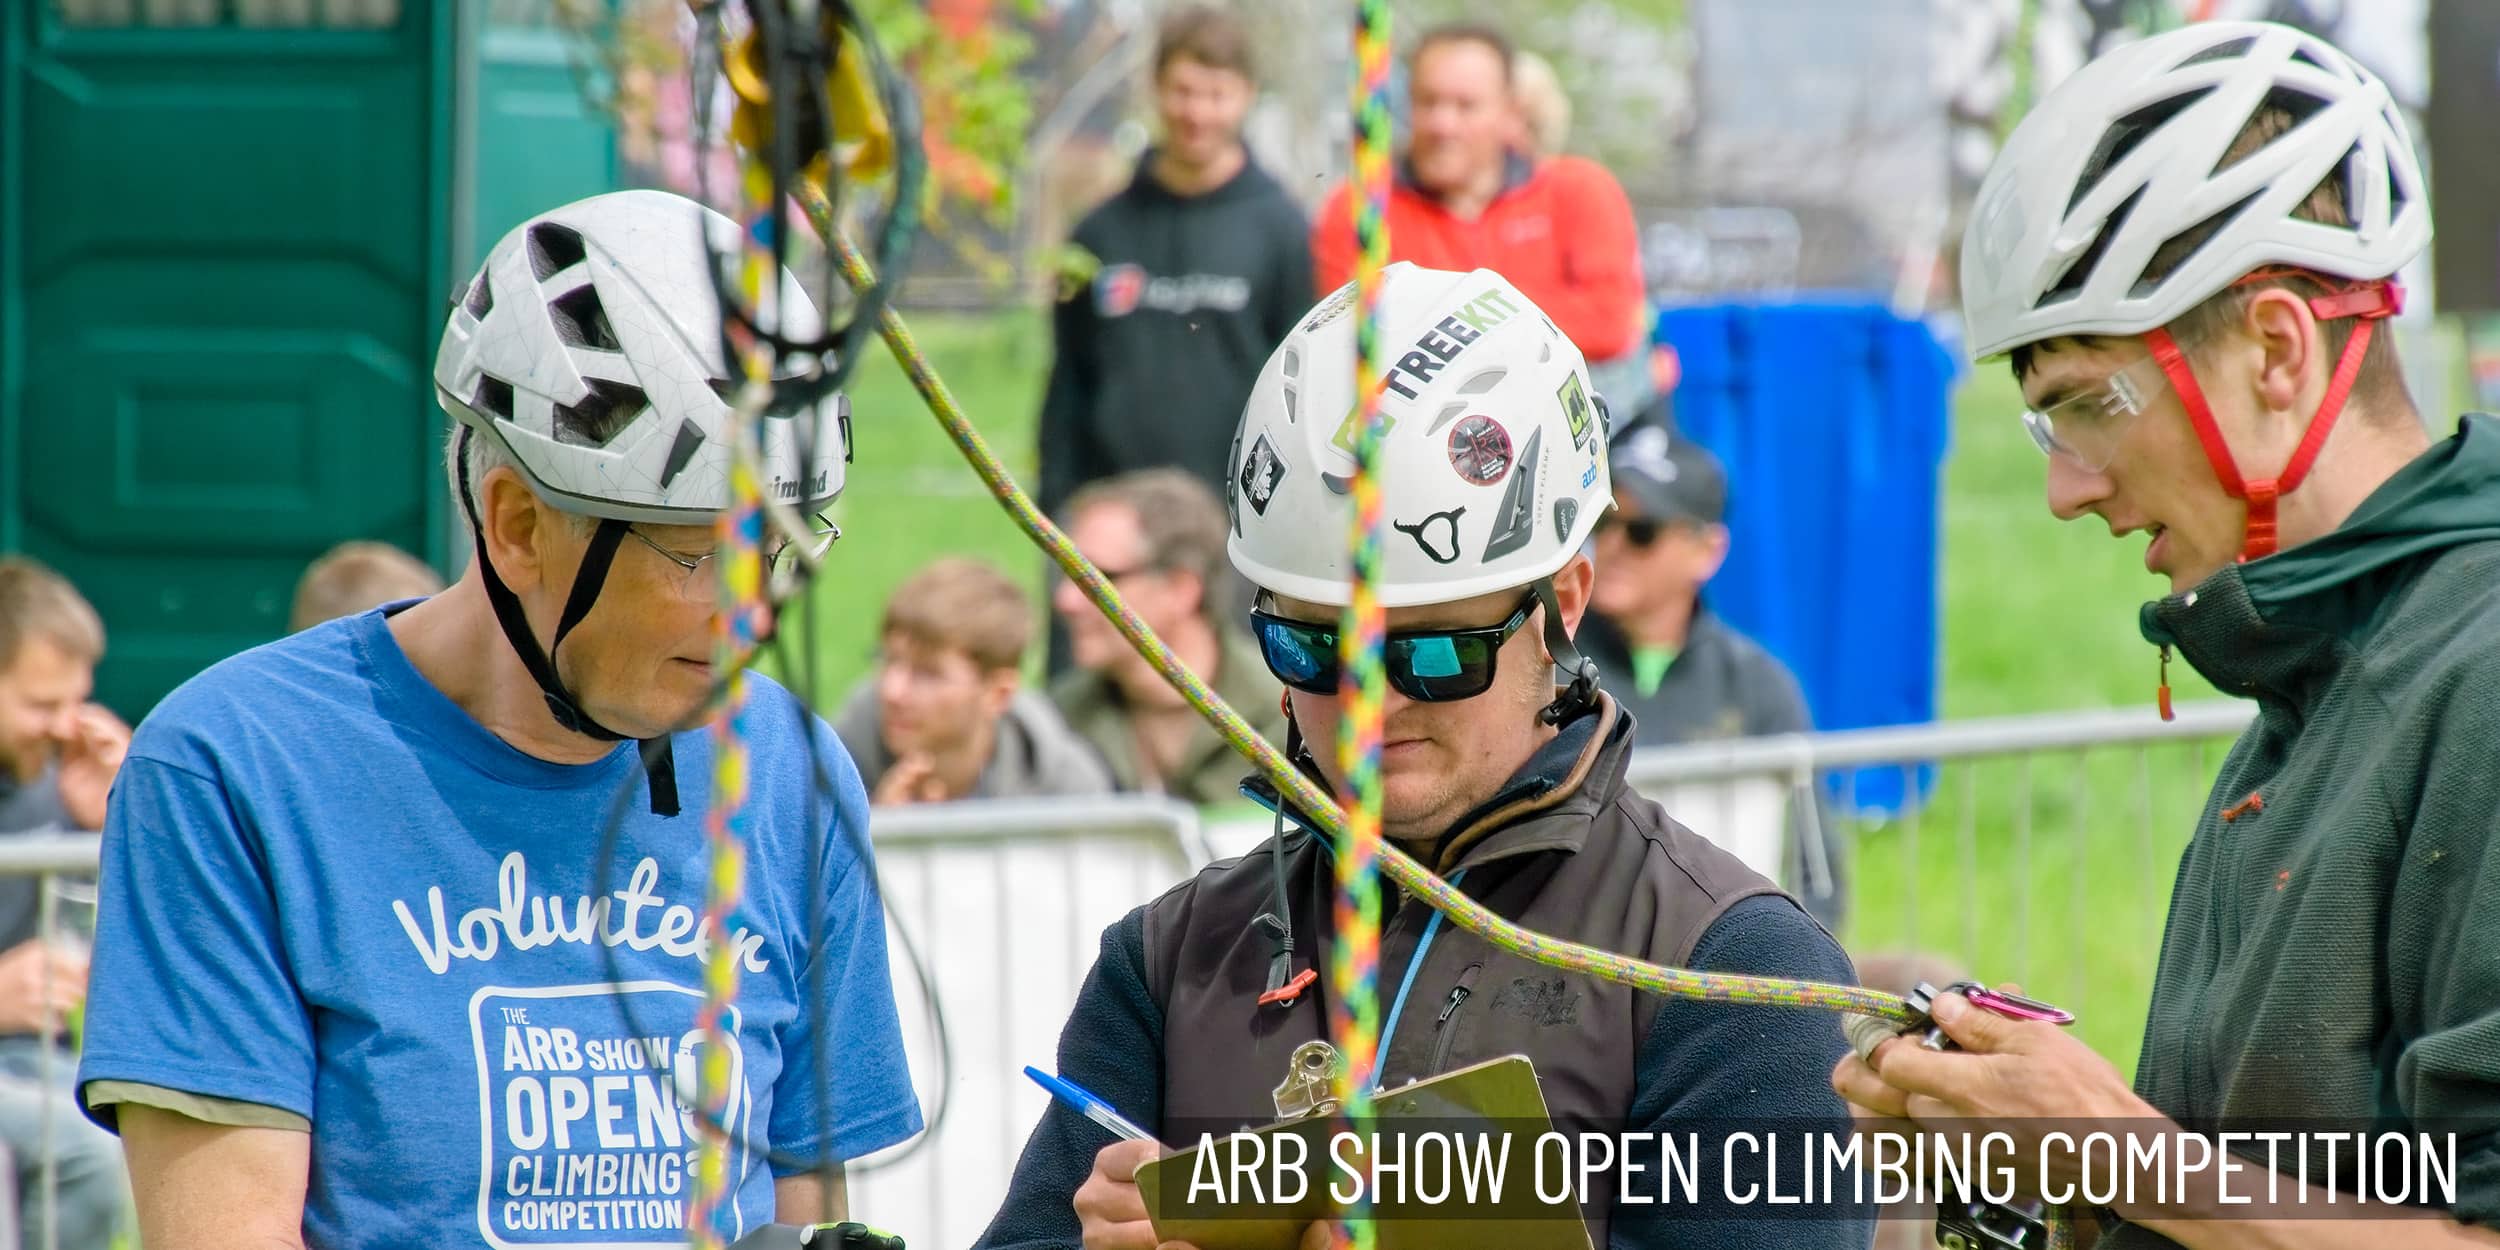 The ARB Show Open Climbing Competiton judging